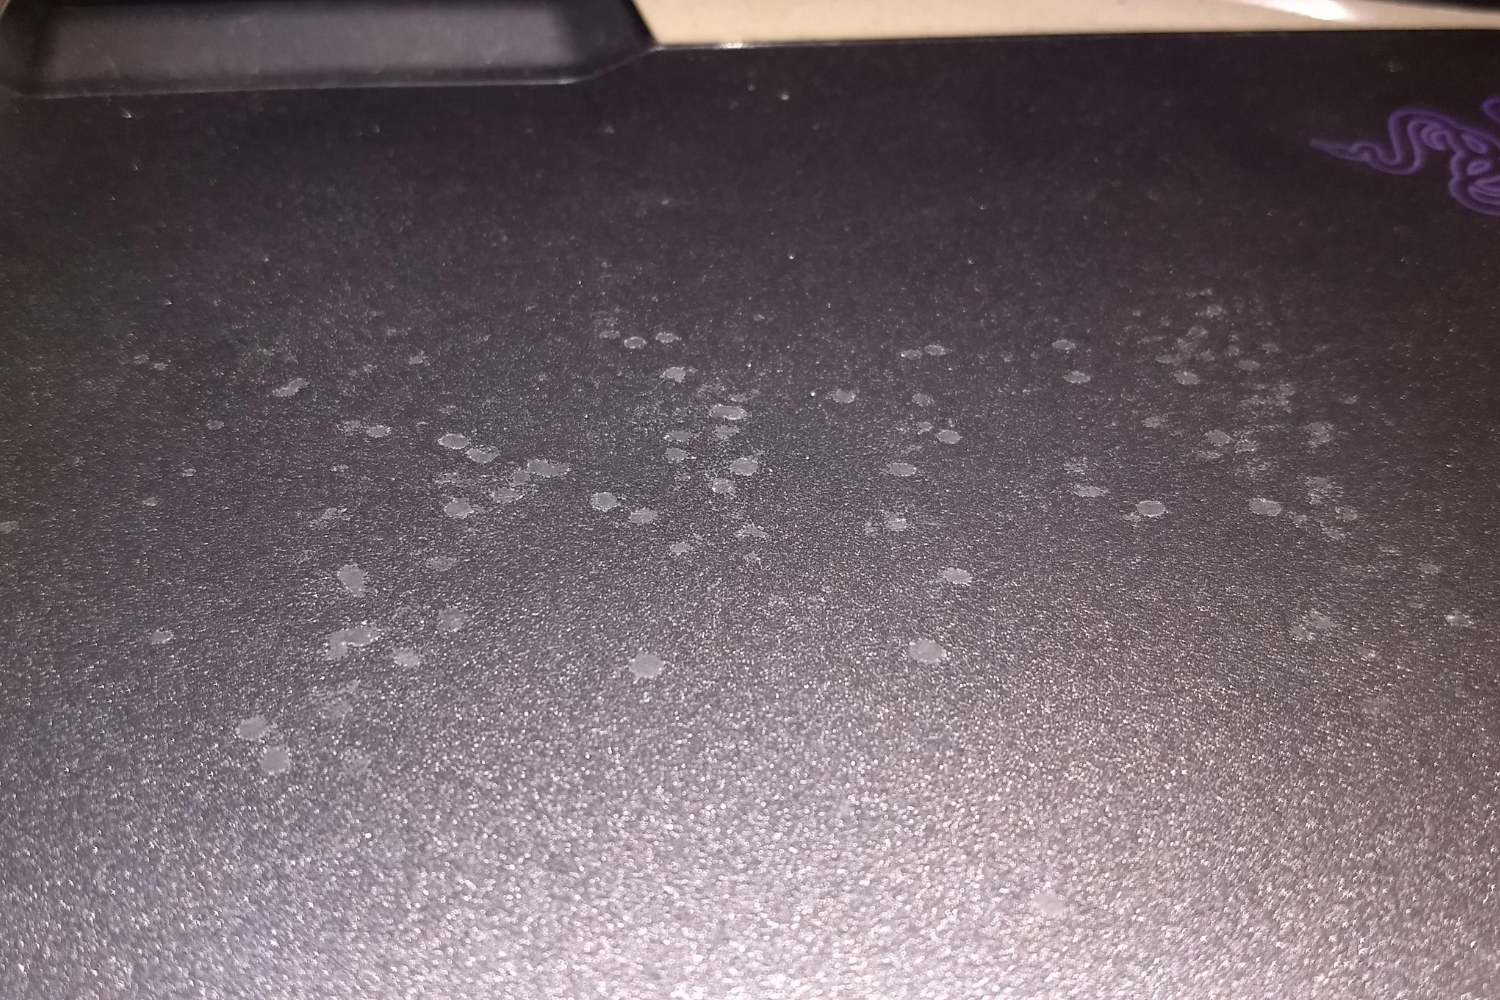 How To Clean Your Mouse Pad That Has White Spots